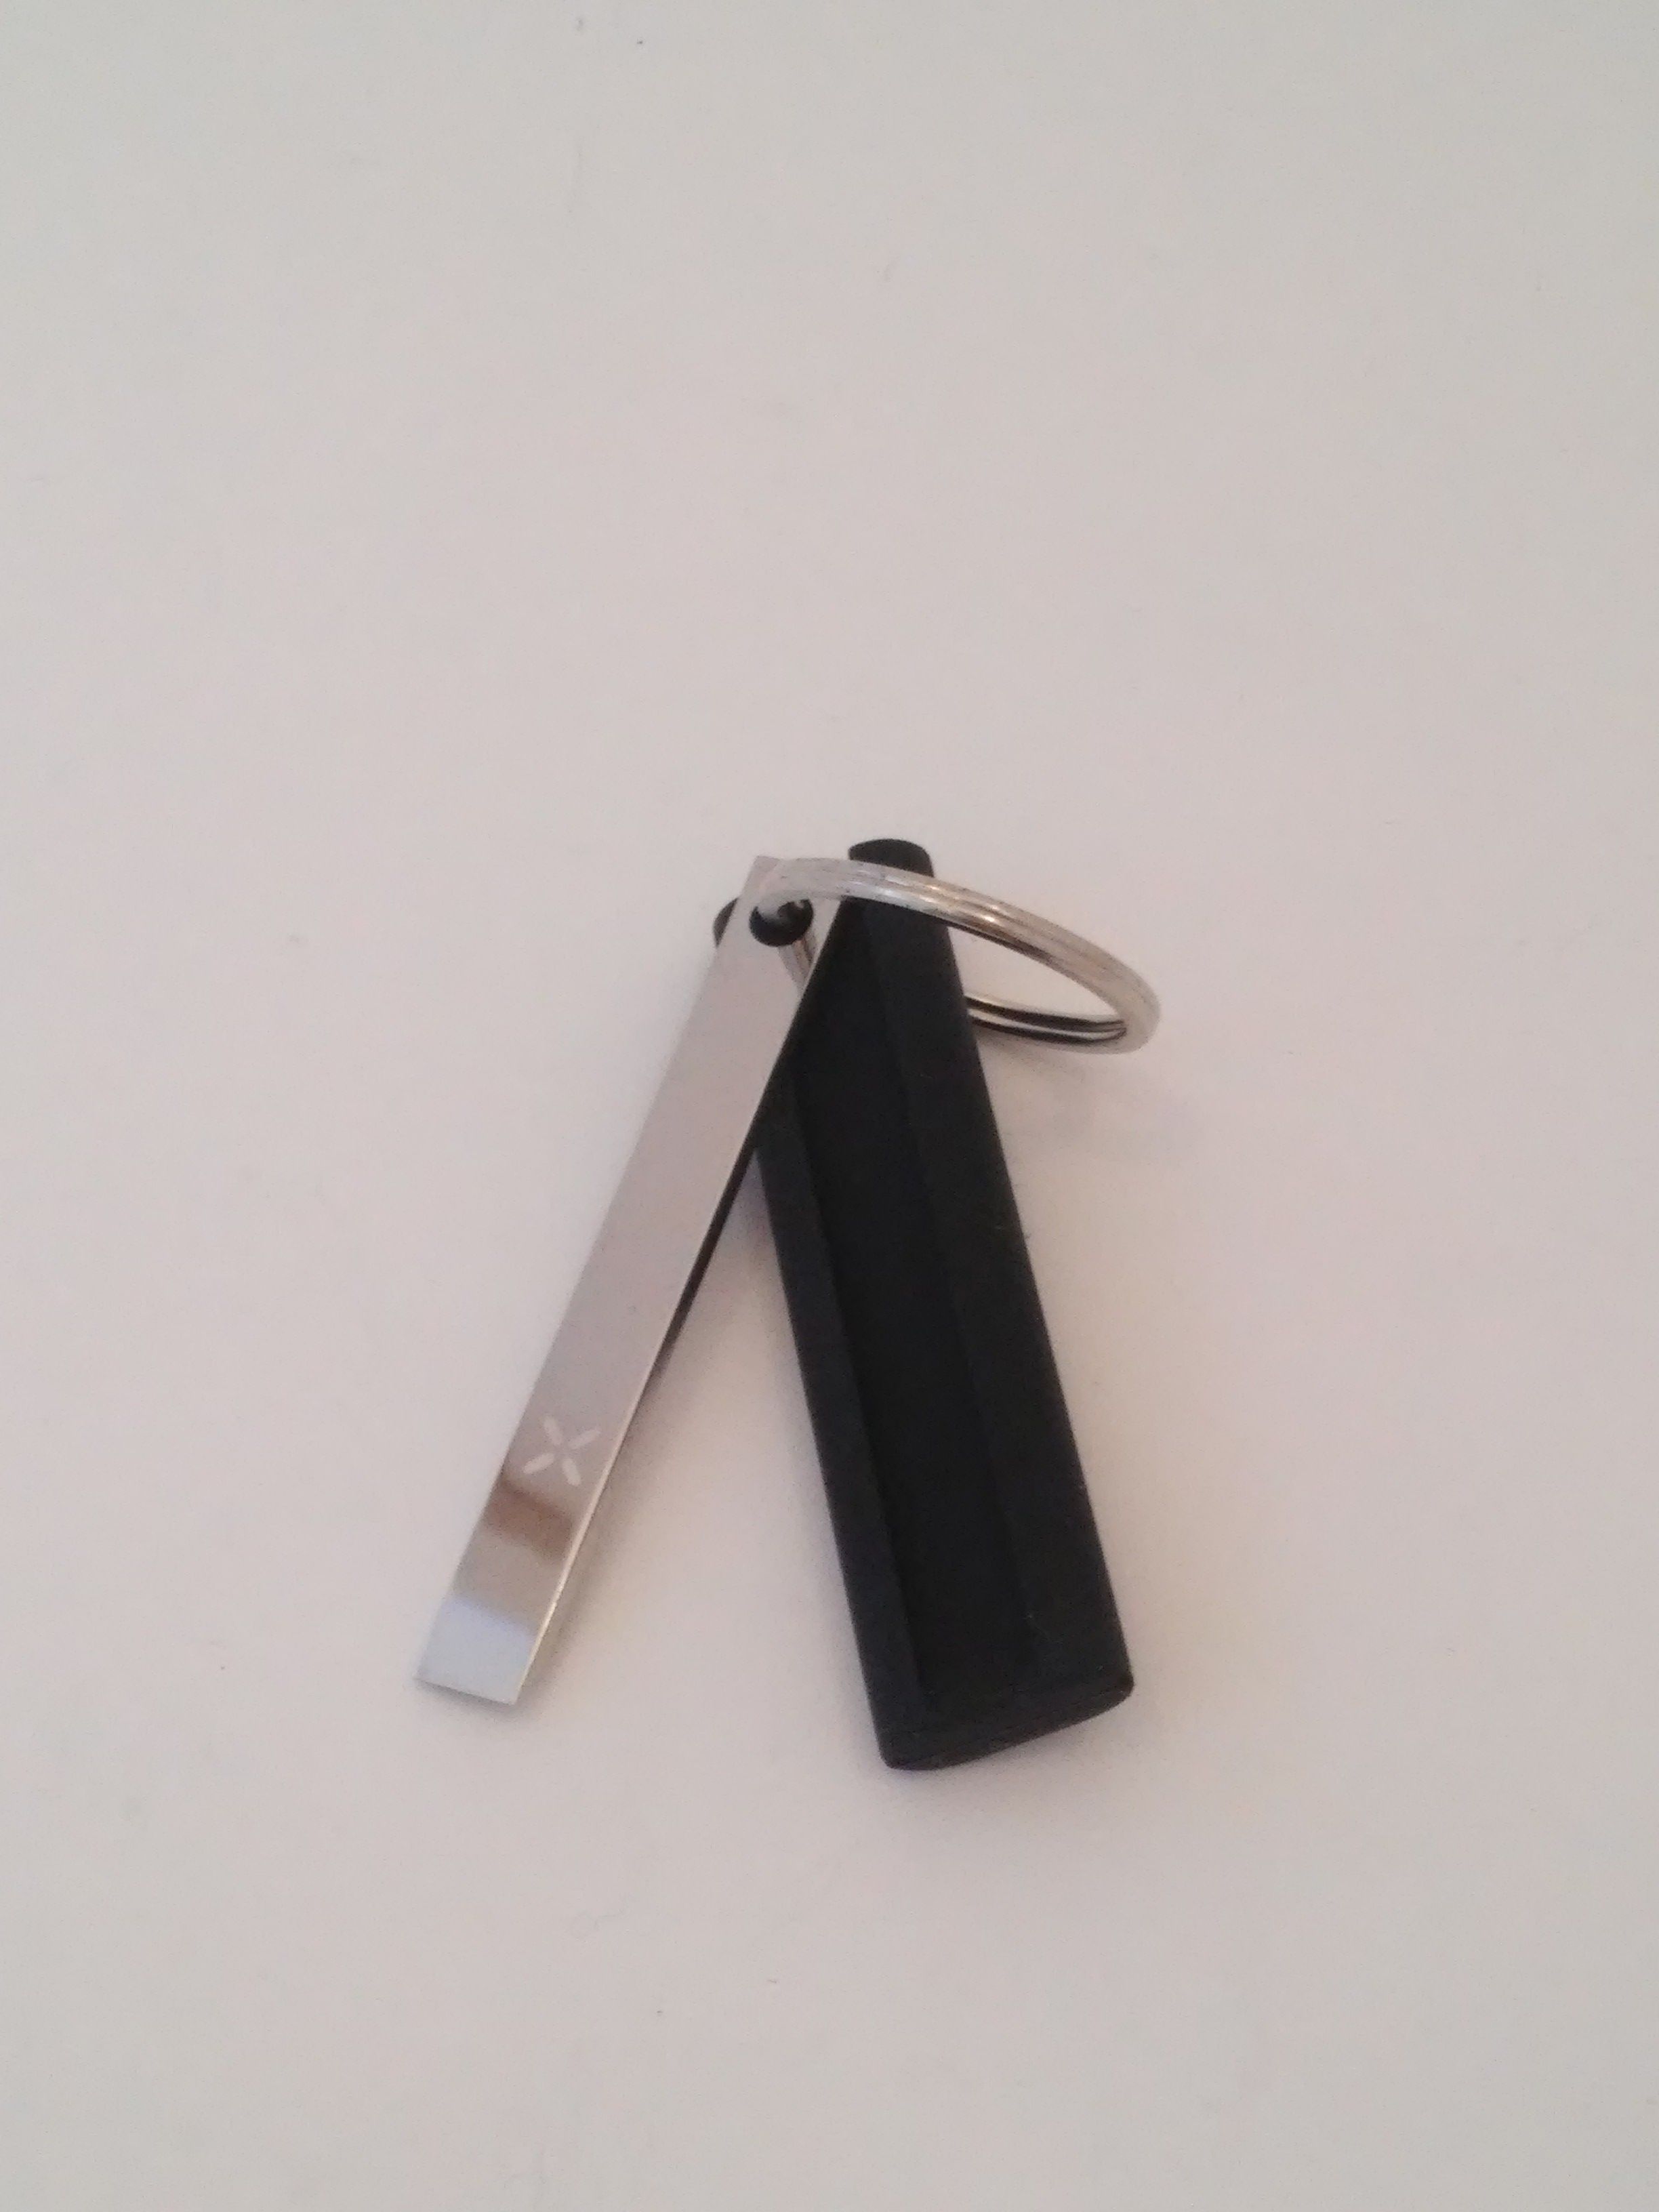 Multi-Tool for PAX and other vaporizers